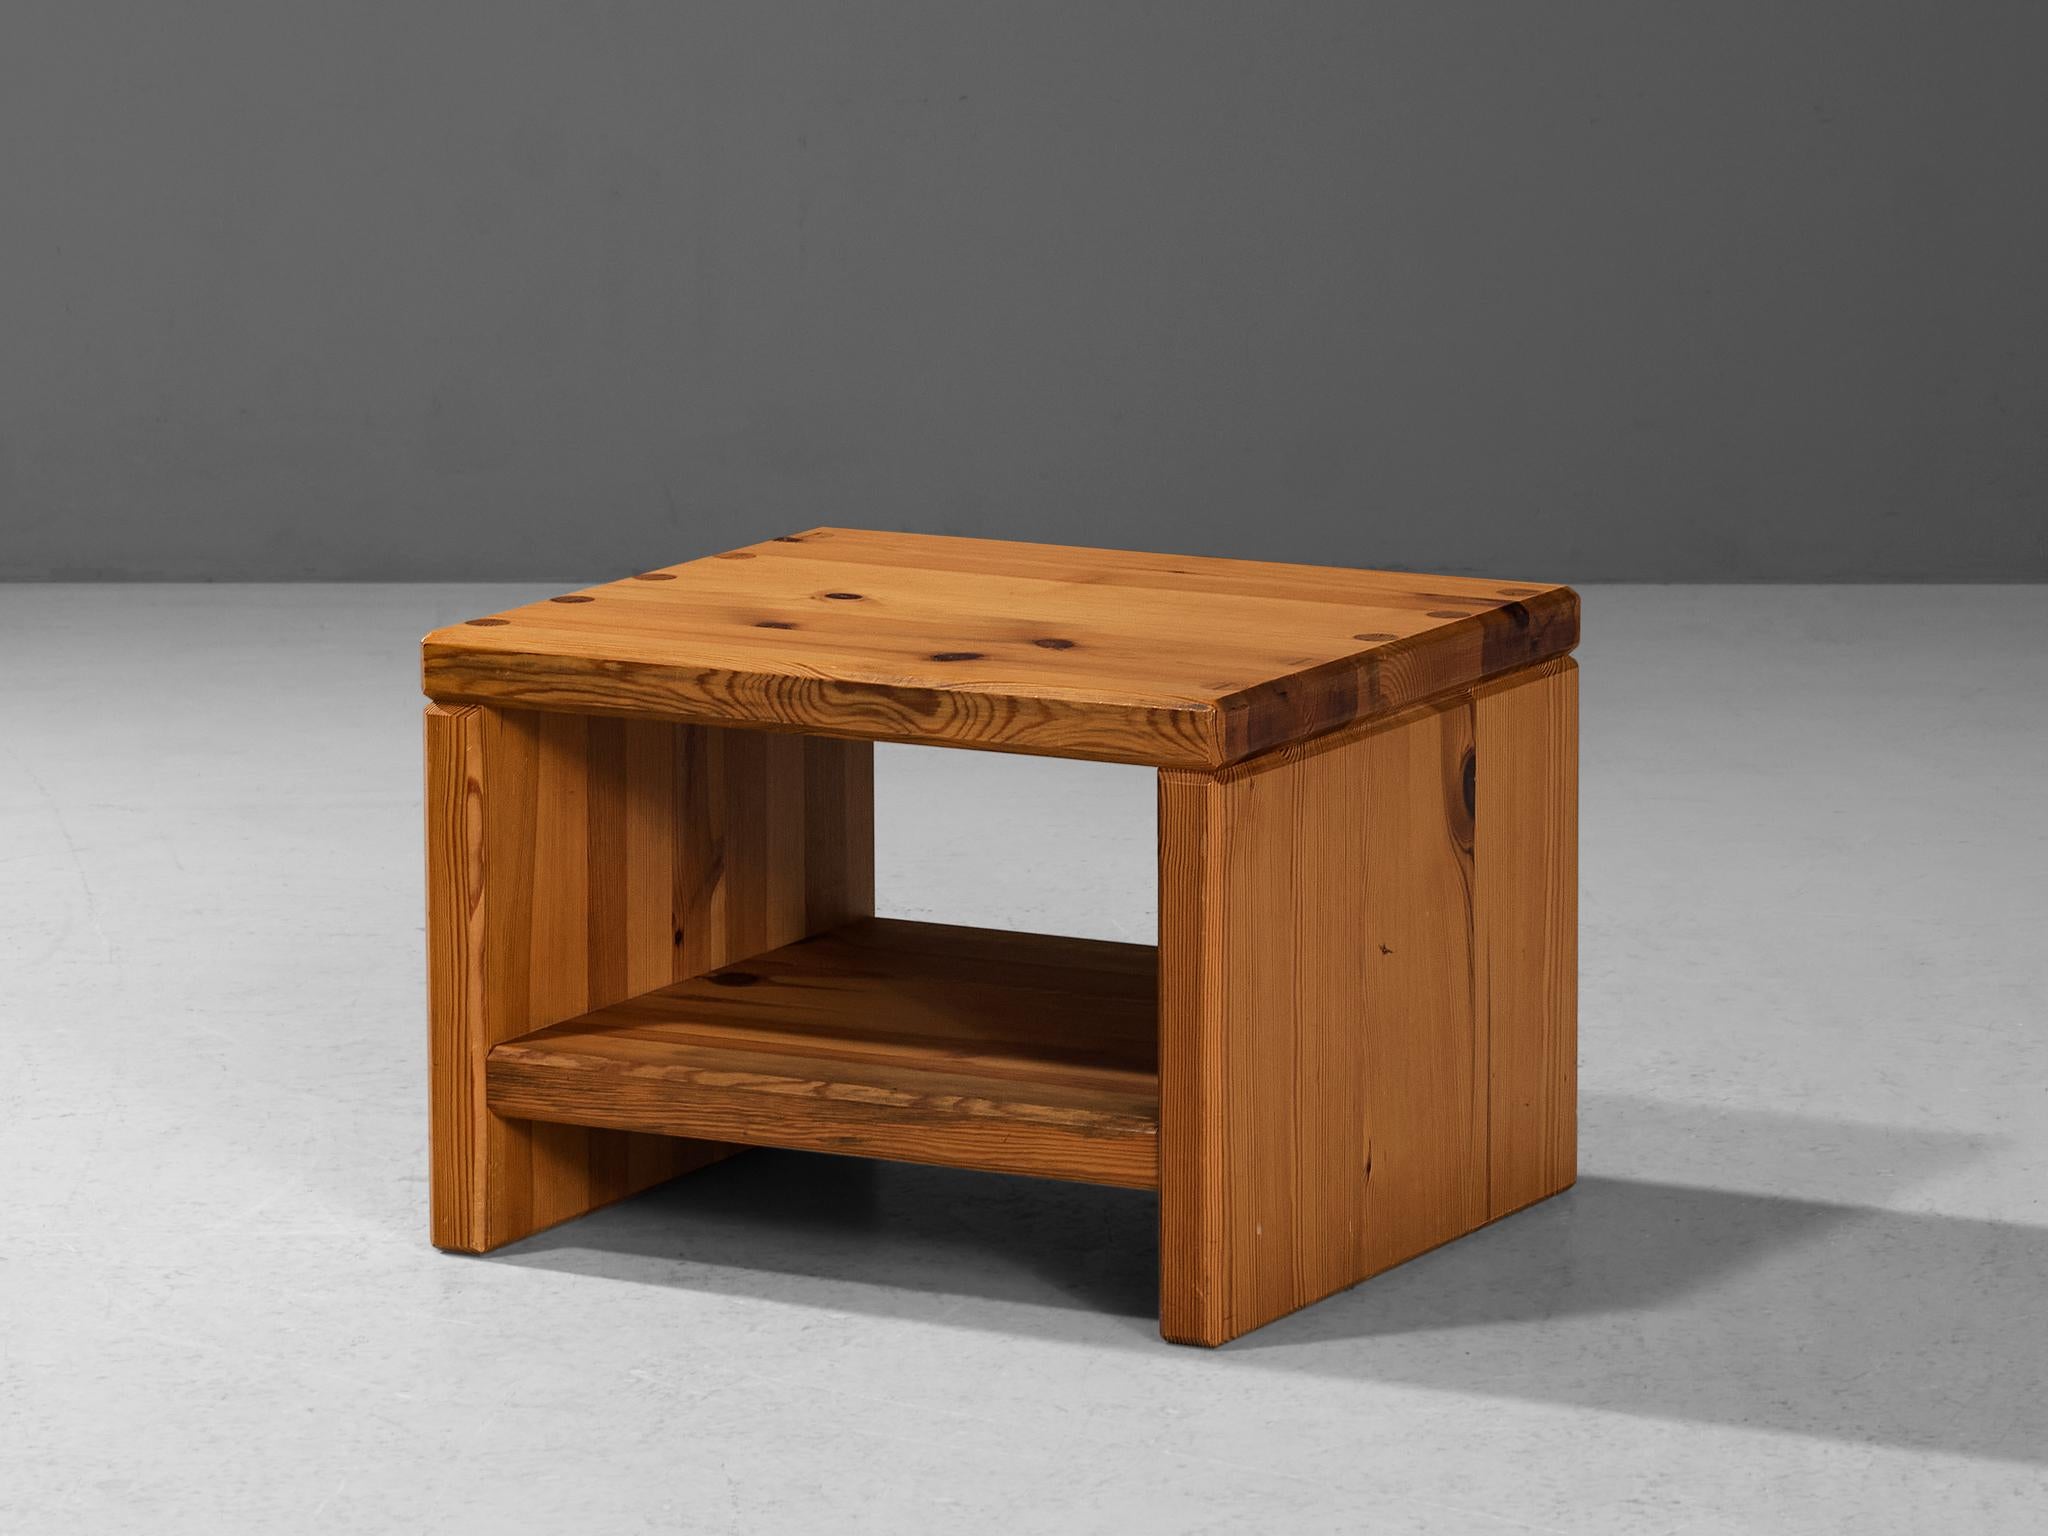 Roland Wilhelmsson for Karl Andersson & Söner, side table, pine, Sweden, 1970s
 
This side table with a solid and sturdy look is constructed in a precise manner implementing straight lines, resulting in a simple and clear furniture piece that is